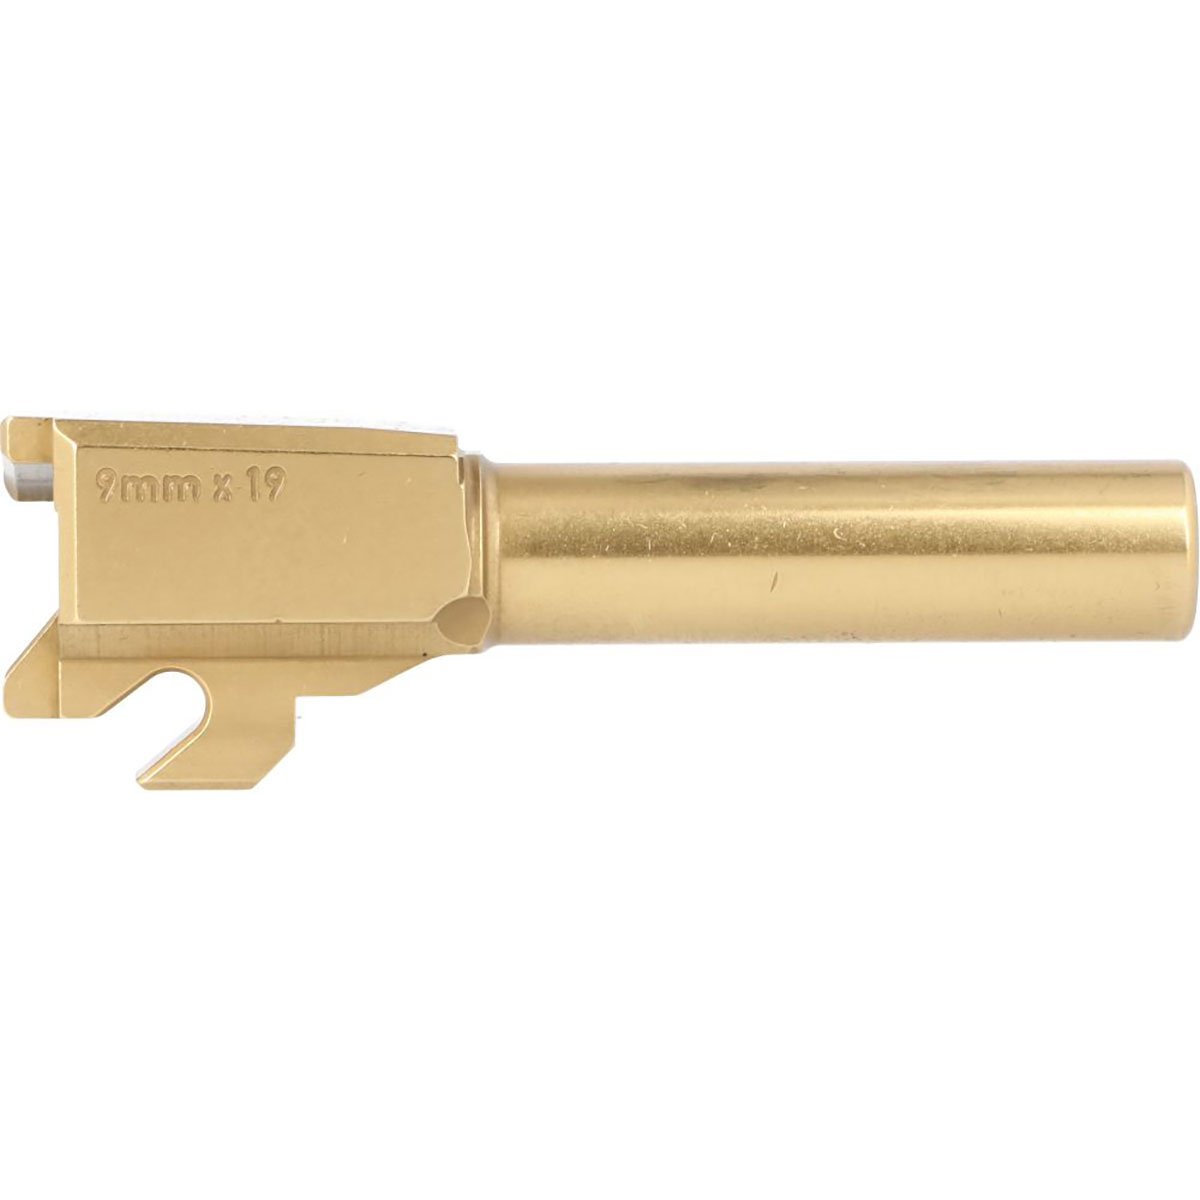 SIG SAUER, INC. - 9MM LUGER BARREL WITHOUT LCI FOR SIG SAUER® P320 SUBCOMPACT